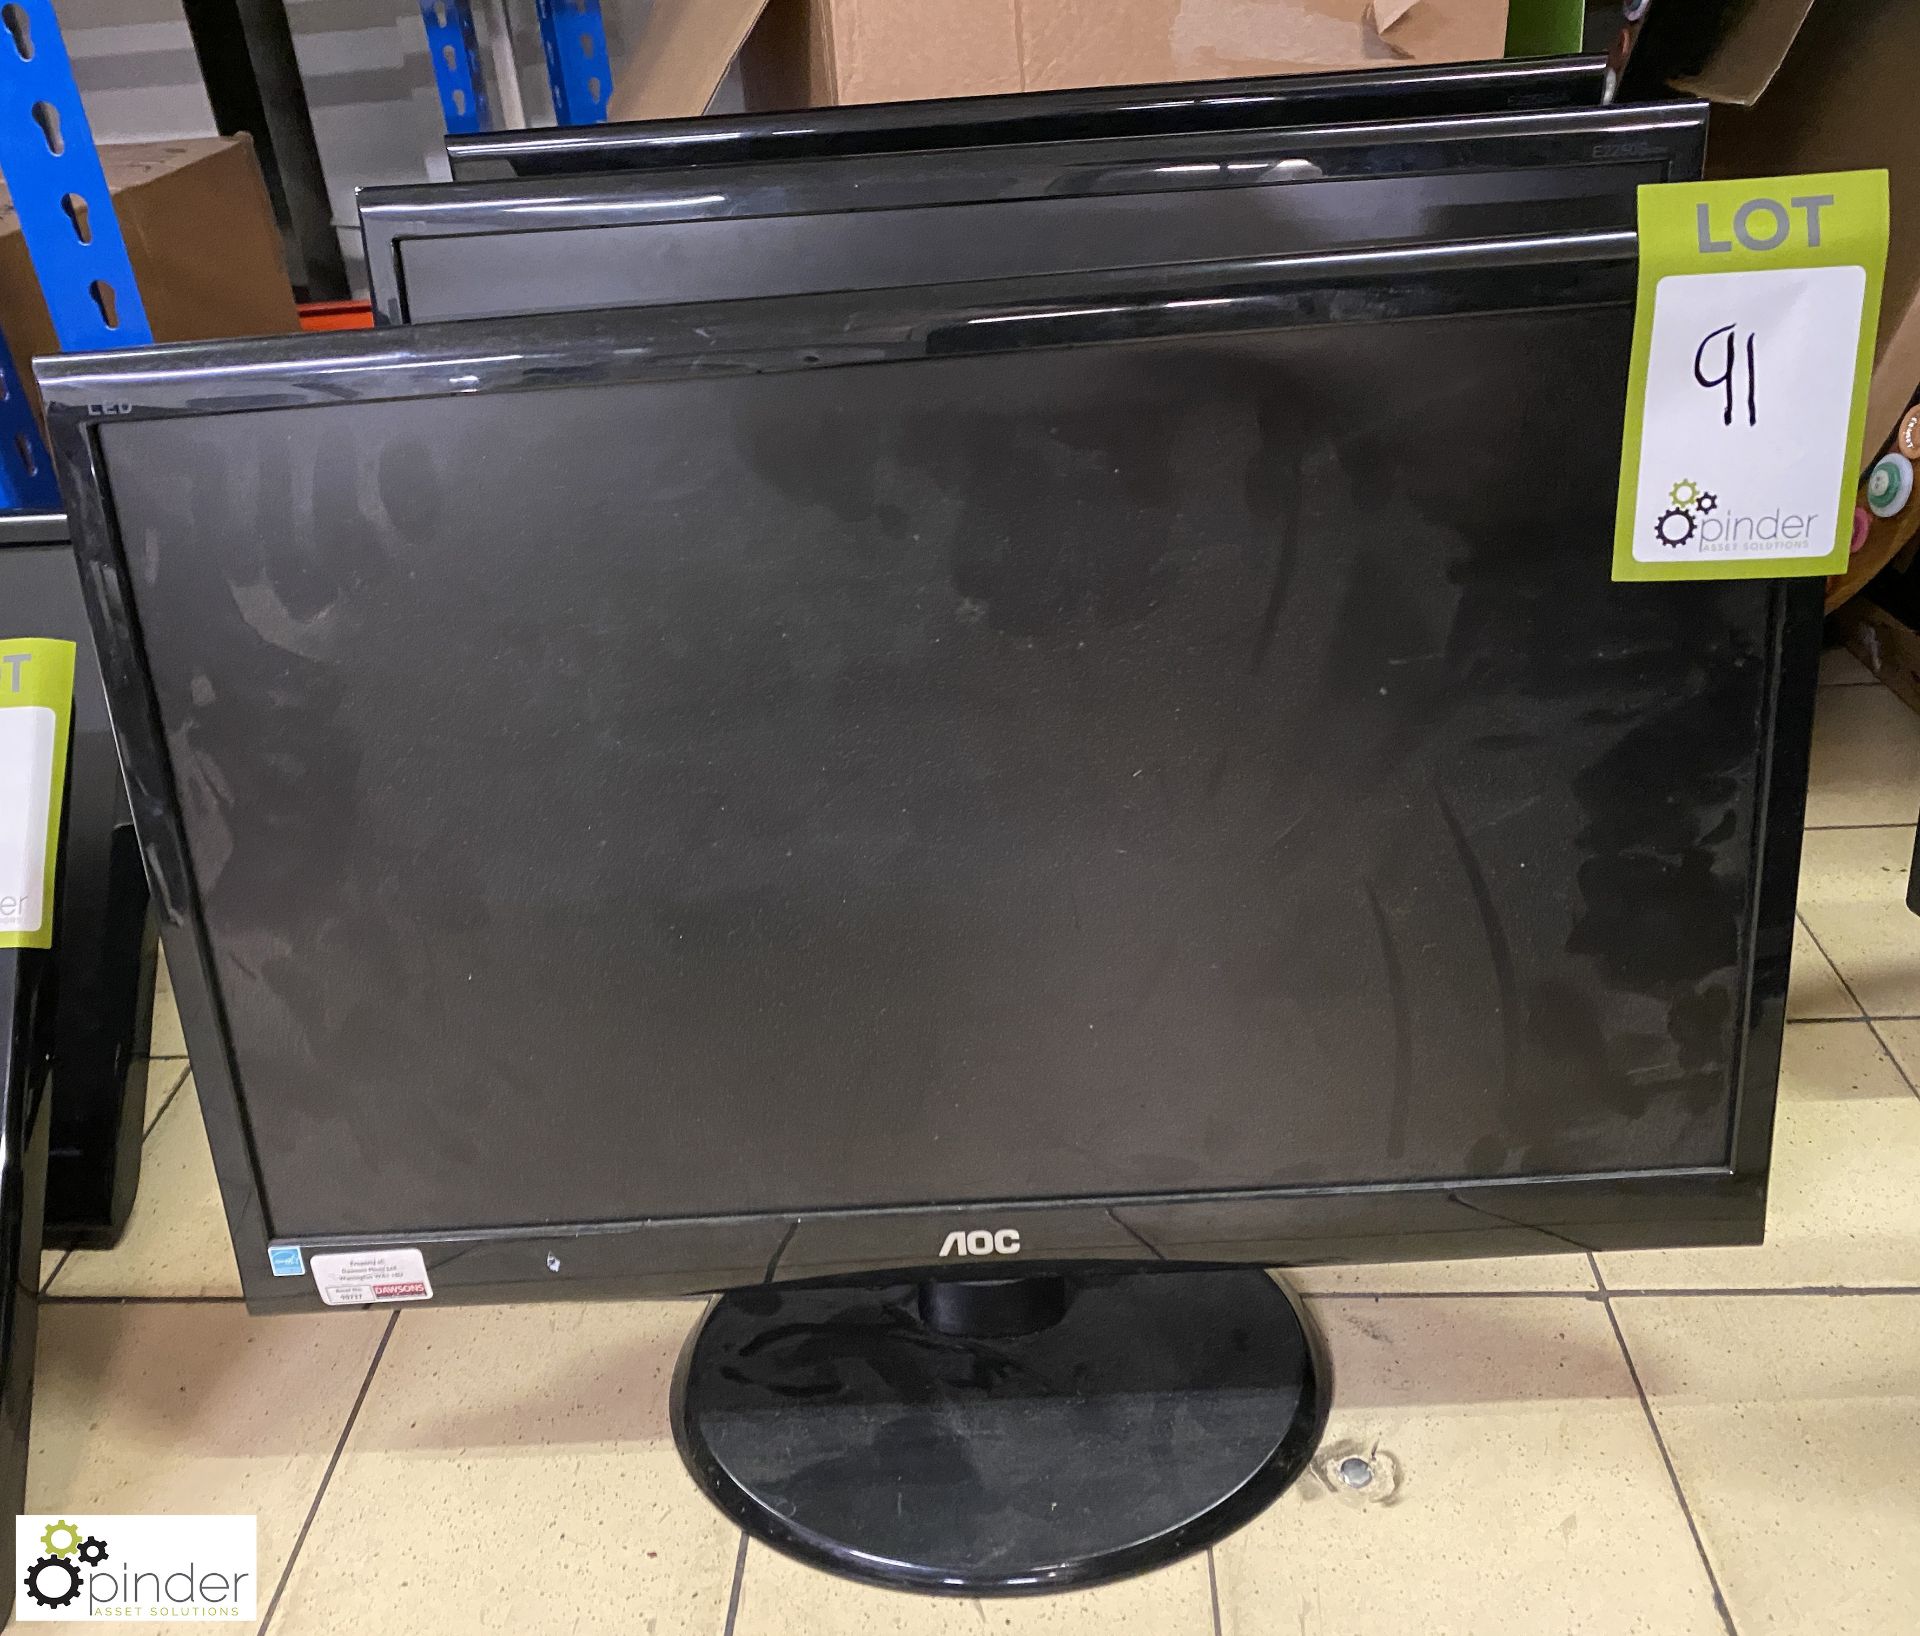 3 AOC E22505 Flat Panel Monitors, with stands - Image 2 of 4